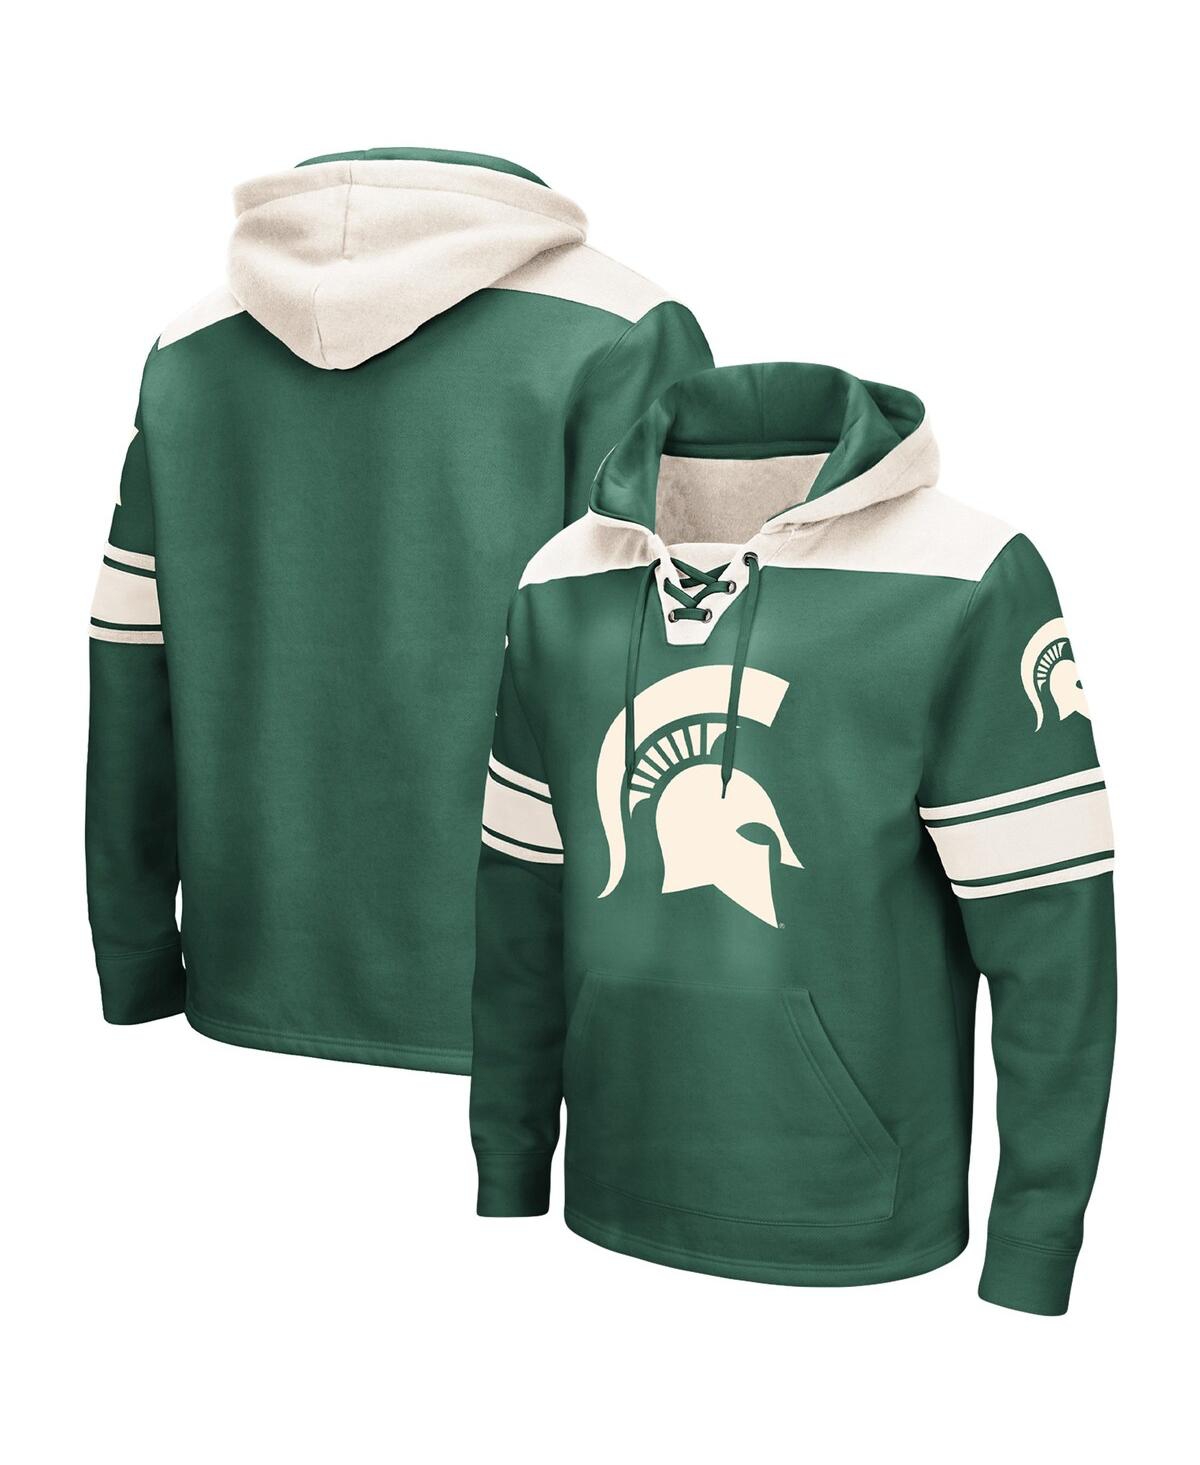 Men's Colosseum Green Michigan State Spartans Big and Tall Hockey Lace-Up Pullover Hoodie - Green